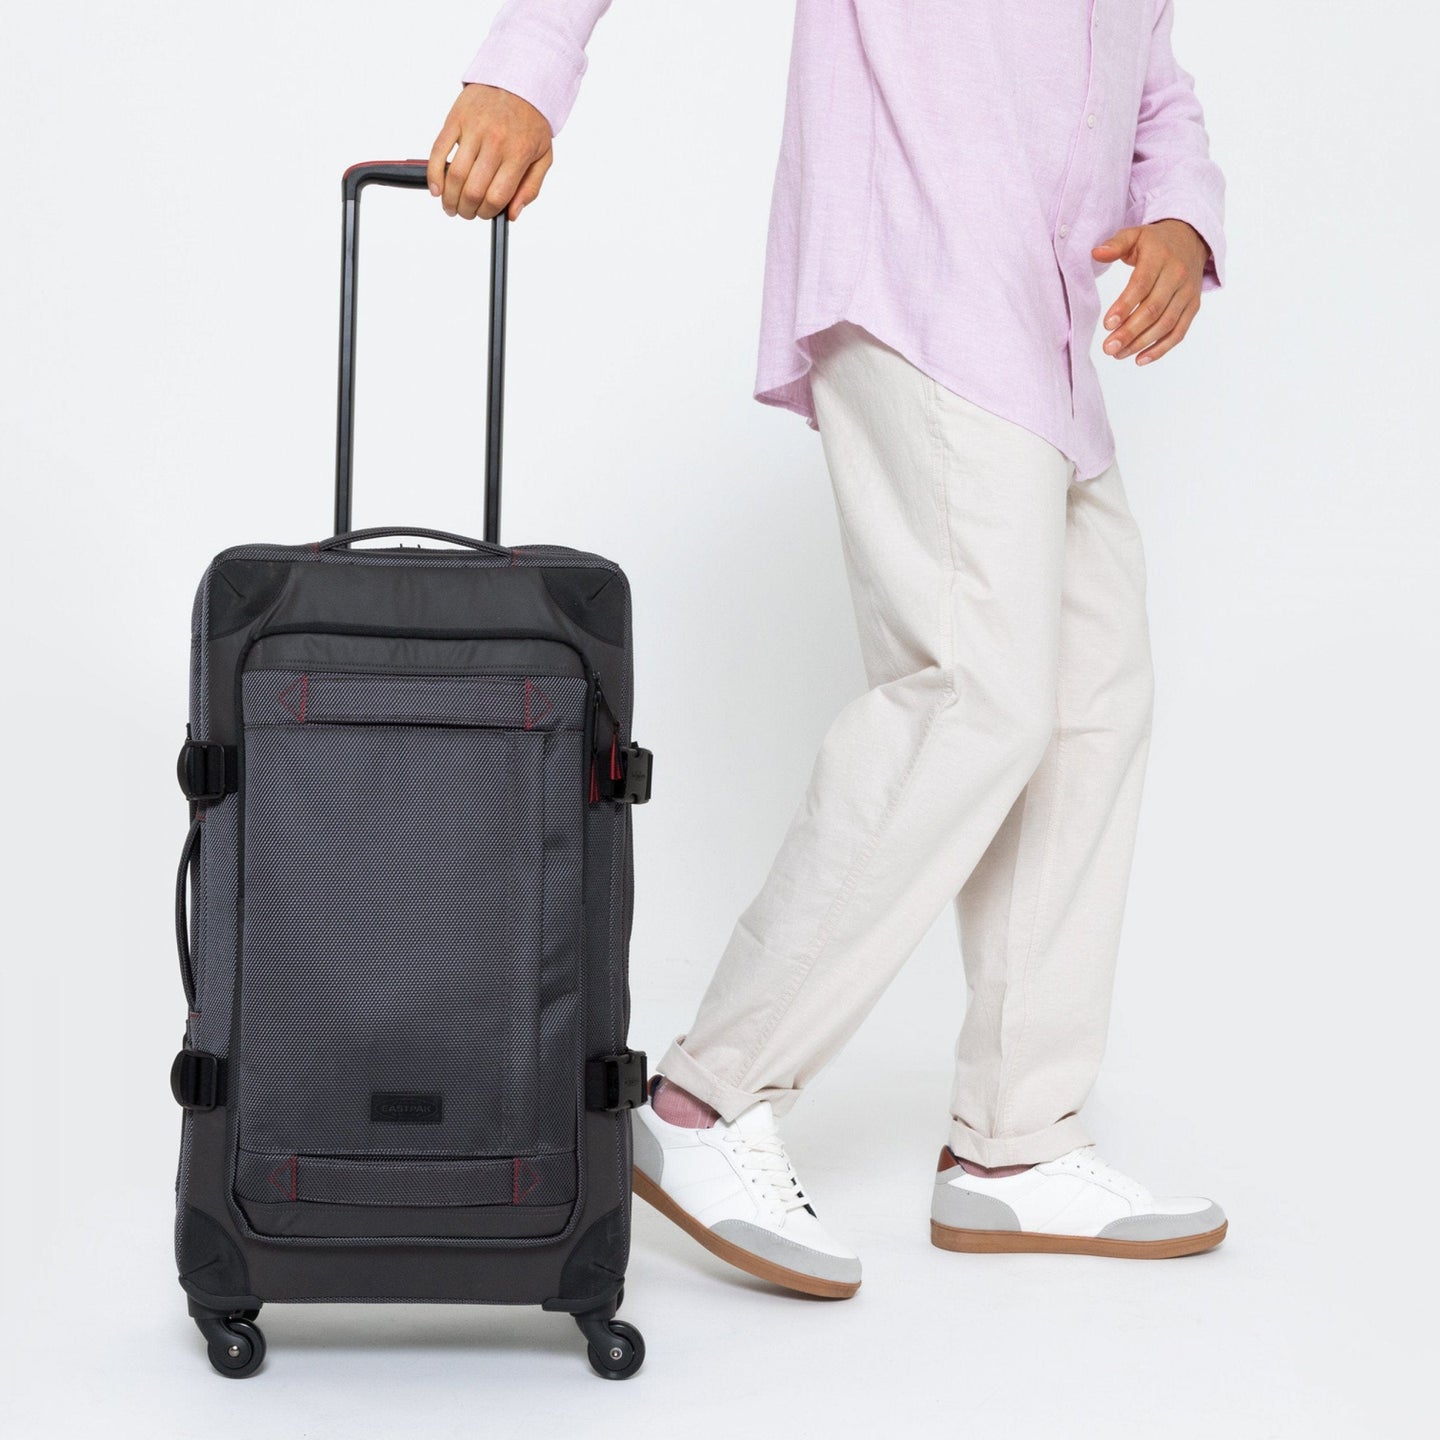 Trans4 Cnnct M Accent Grey Roller Luggage Front View With Model Walking